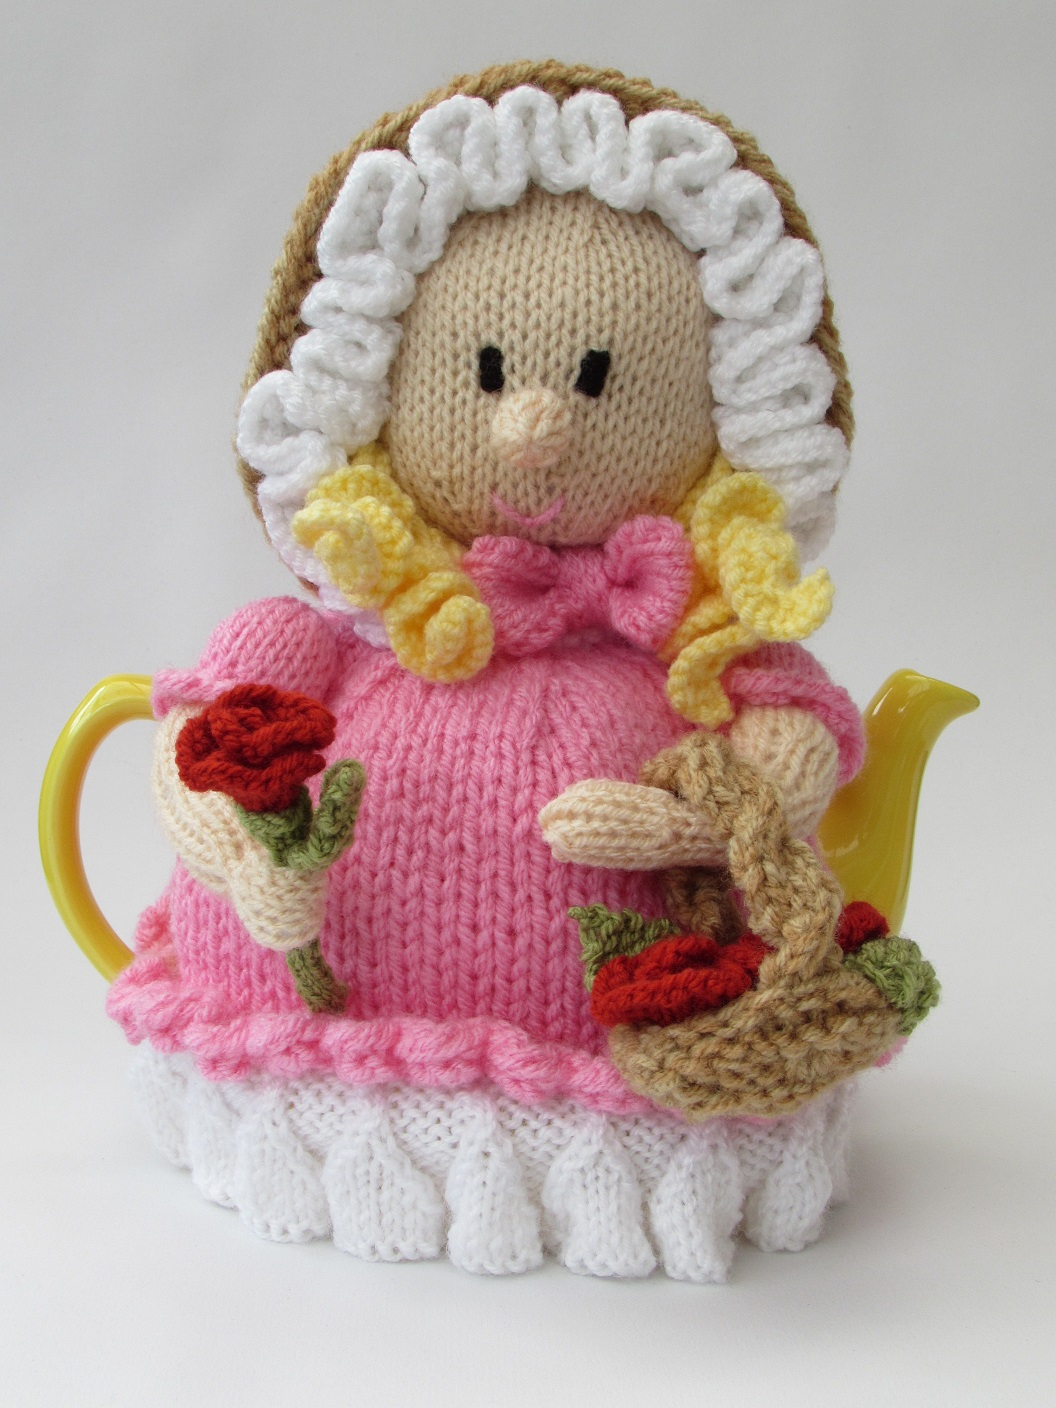 Tea Cosy Patterns To Knit Victorian Flower Girl Tea Cosy Knitting Pattern